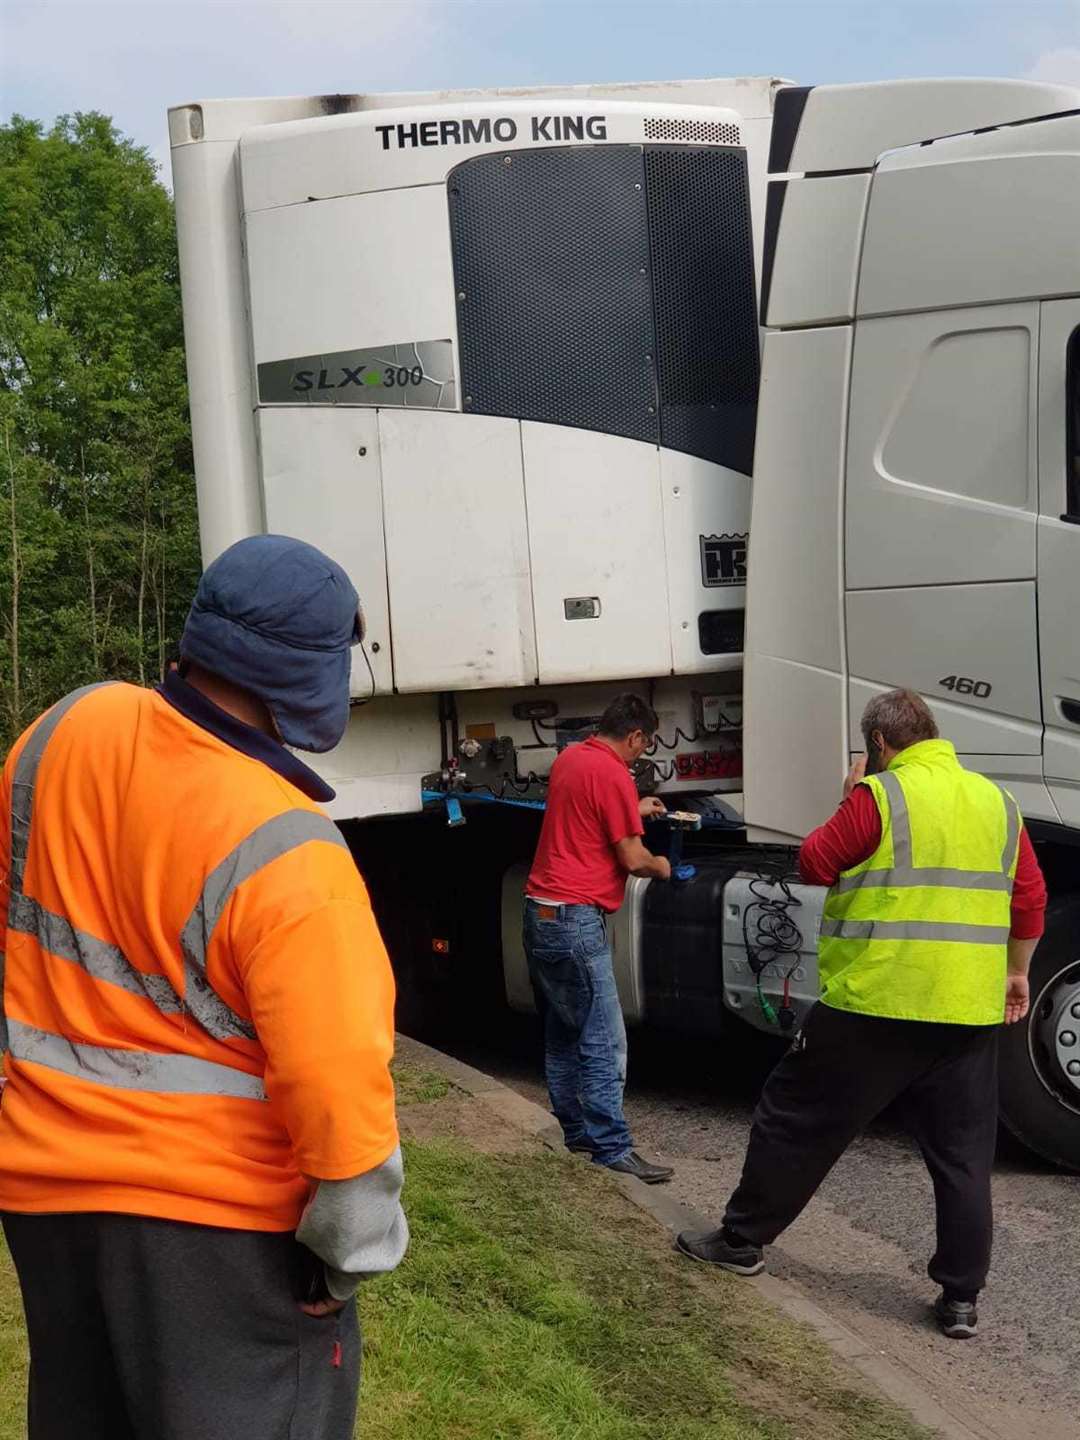 A lorry's trailer blocked the exit road at Maidstone Services on the M20. Photos: Darren Mansfield (2097246)